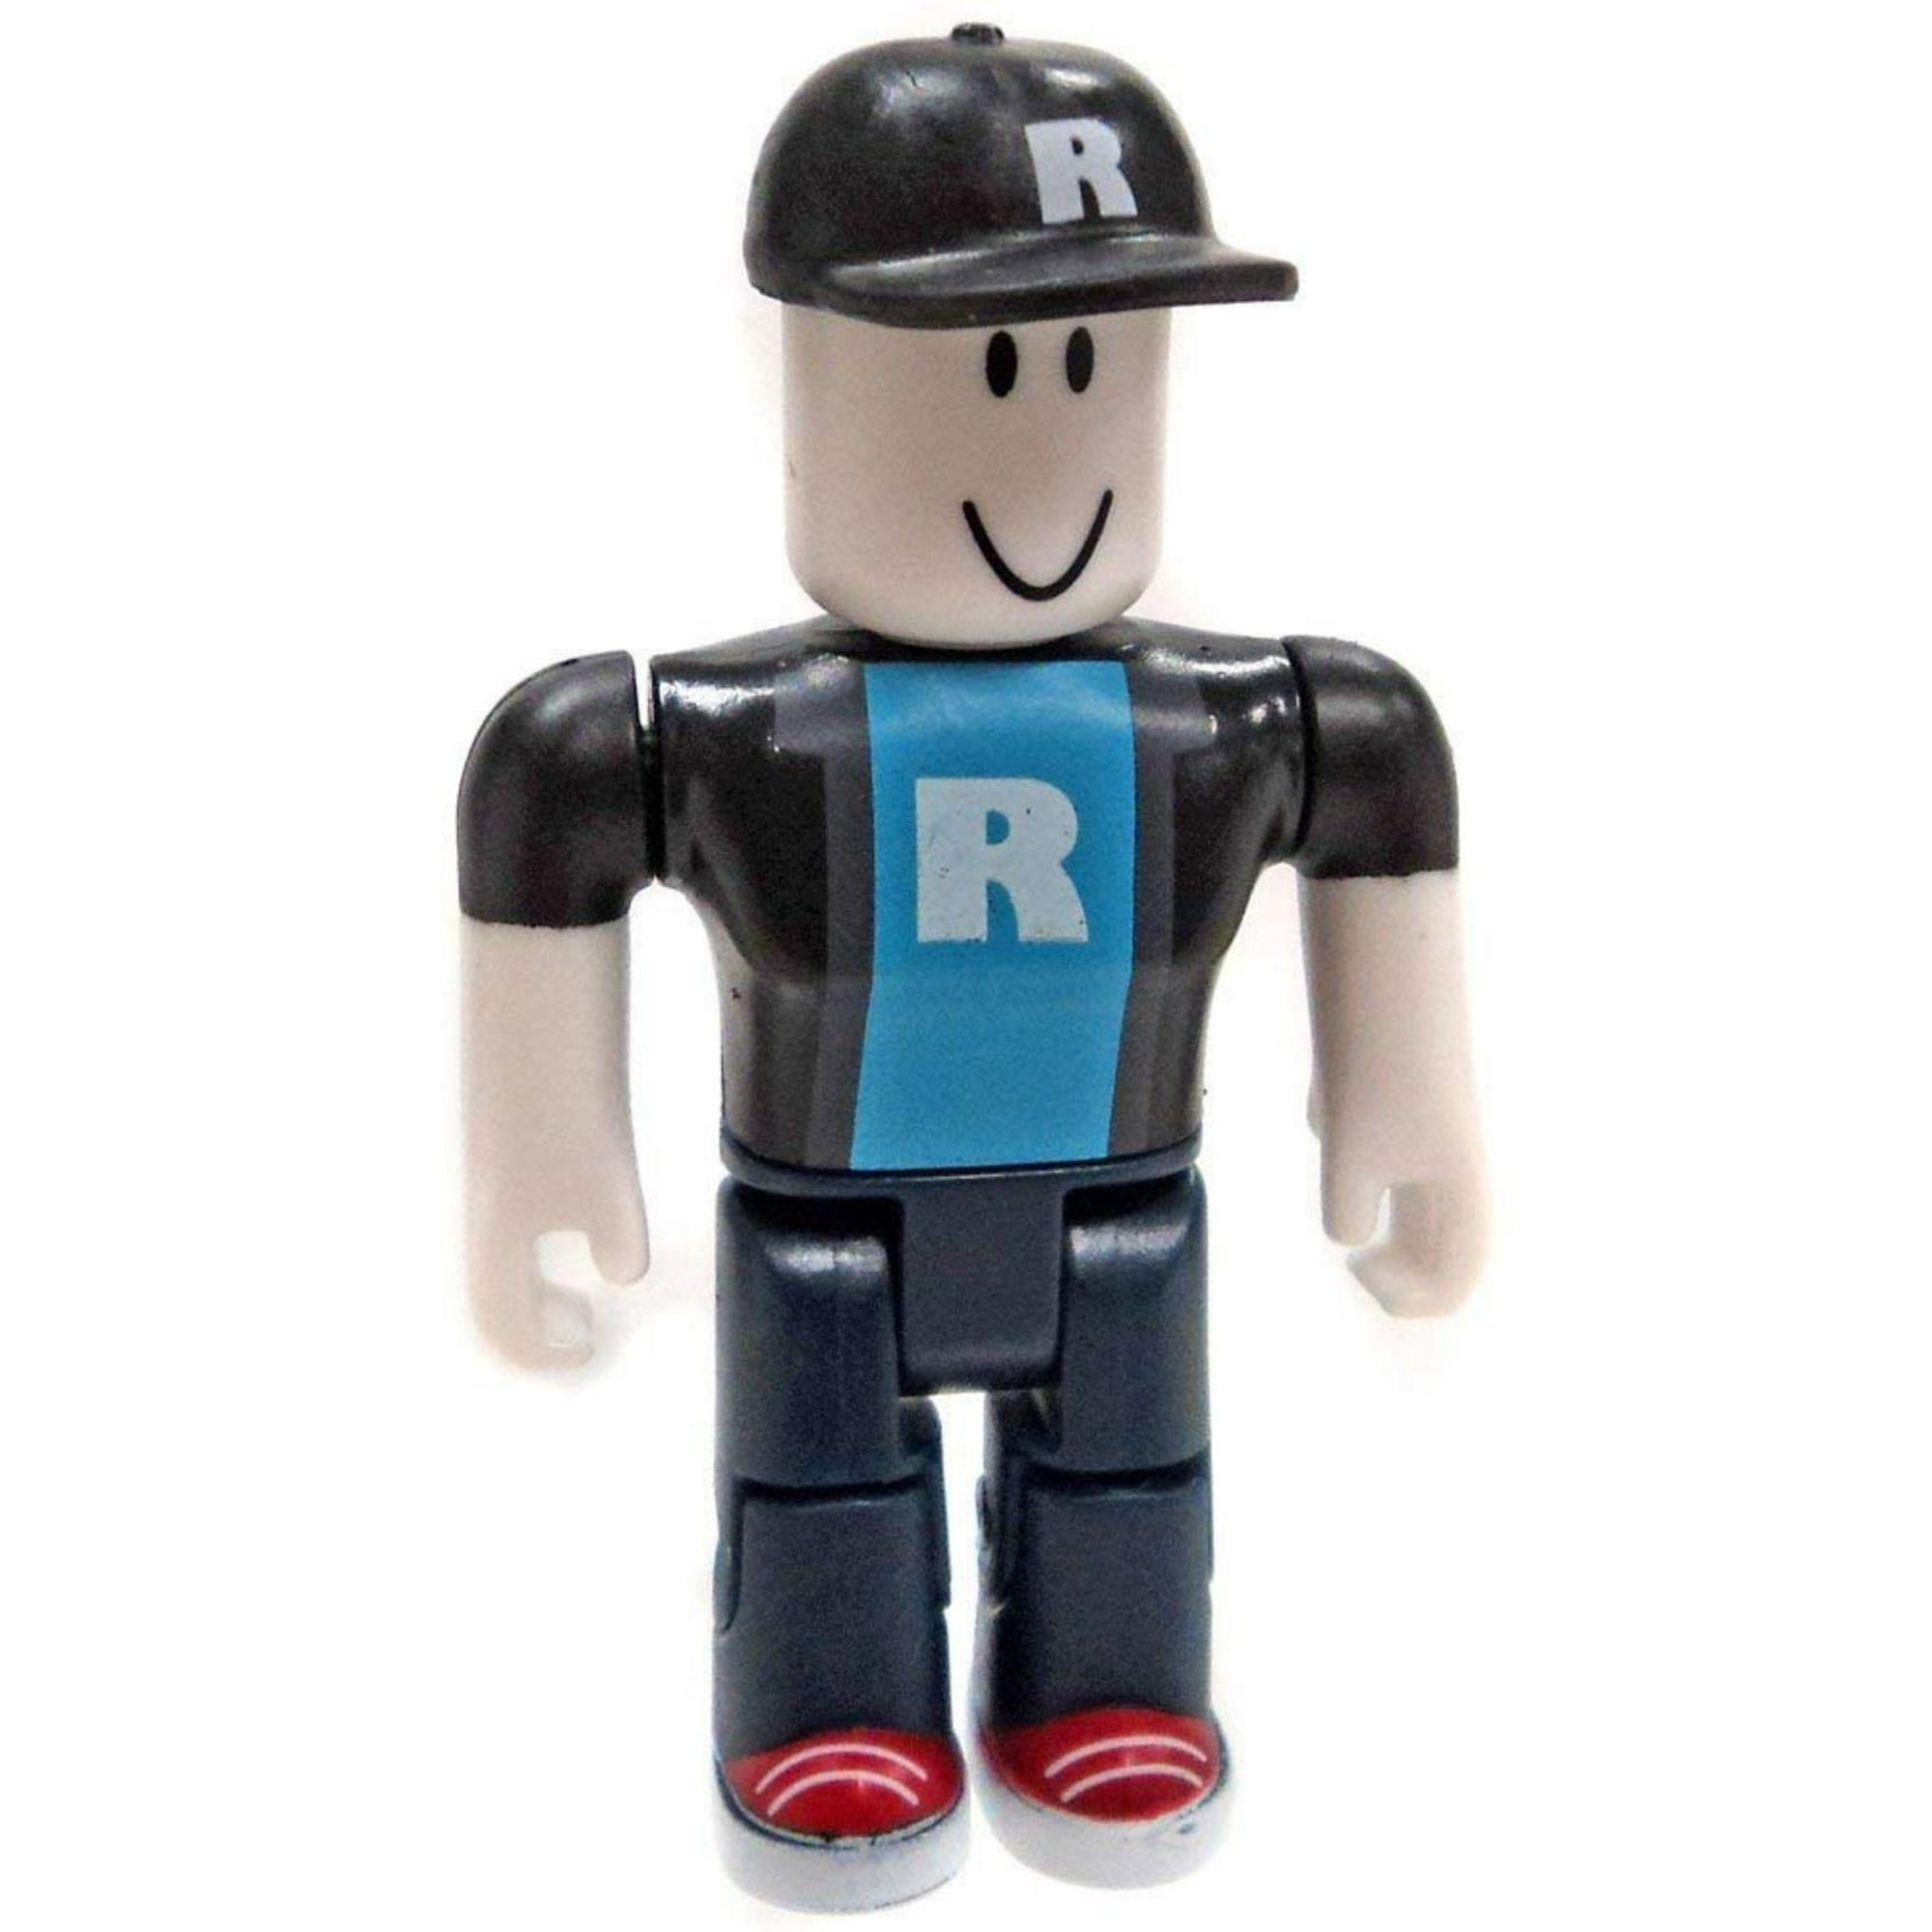 Roblox Series 2 Roblox Super Fan Action Figure Mystery Box Virtual Item Code 2 5 Figure Comes As Pictured With Online Code By Jazwares Walmart Com Walmart Com - roblox action collection series 3 mystery figure includes 1 figure exclusive virtual item walmart com walmart com